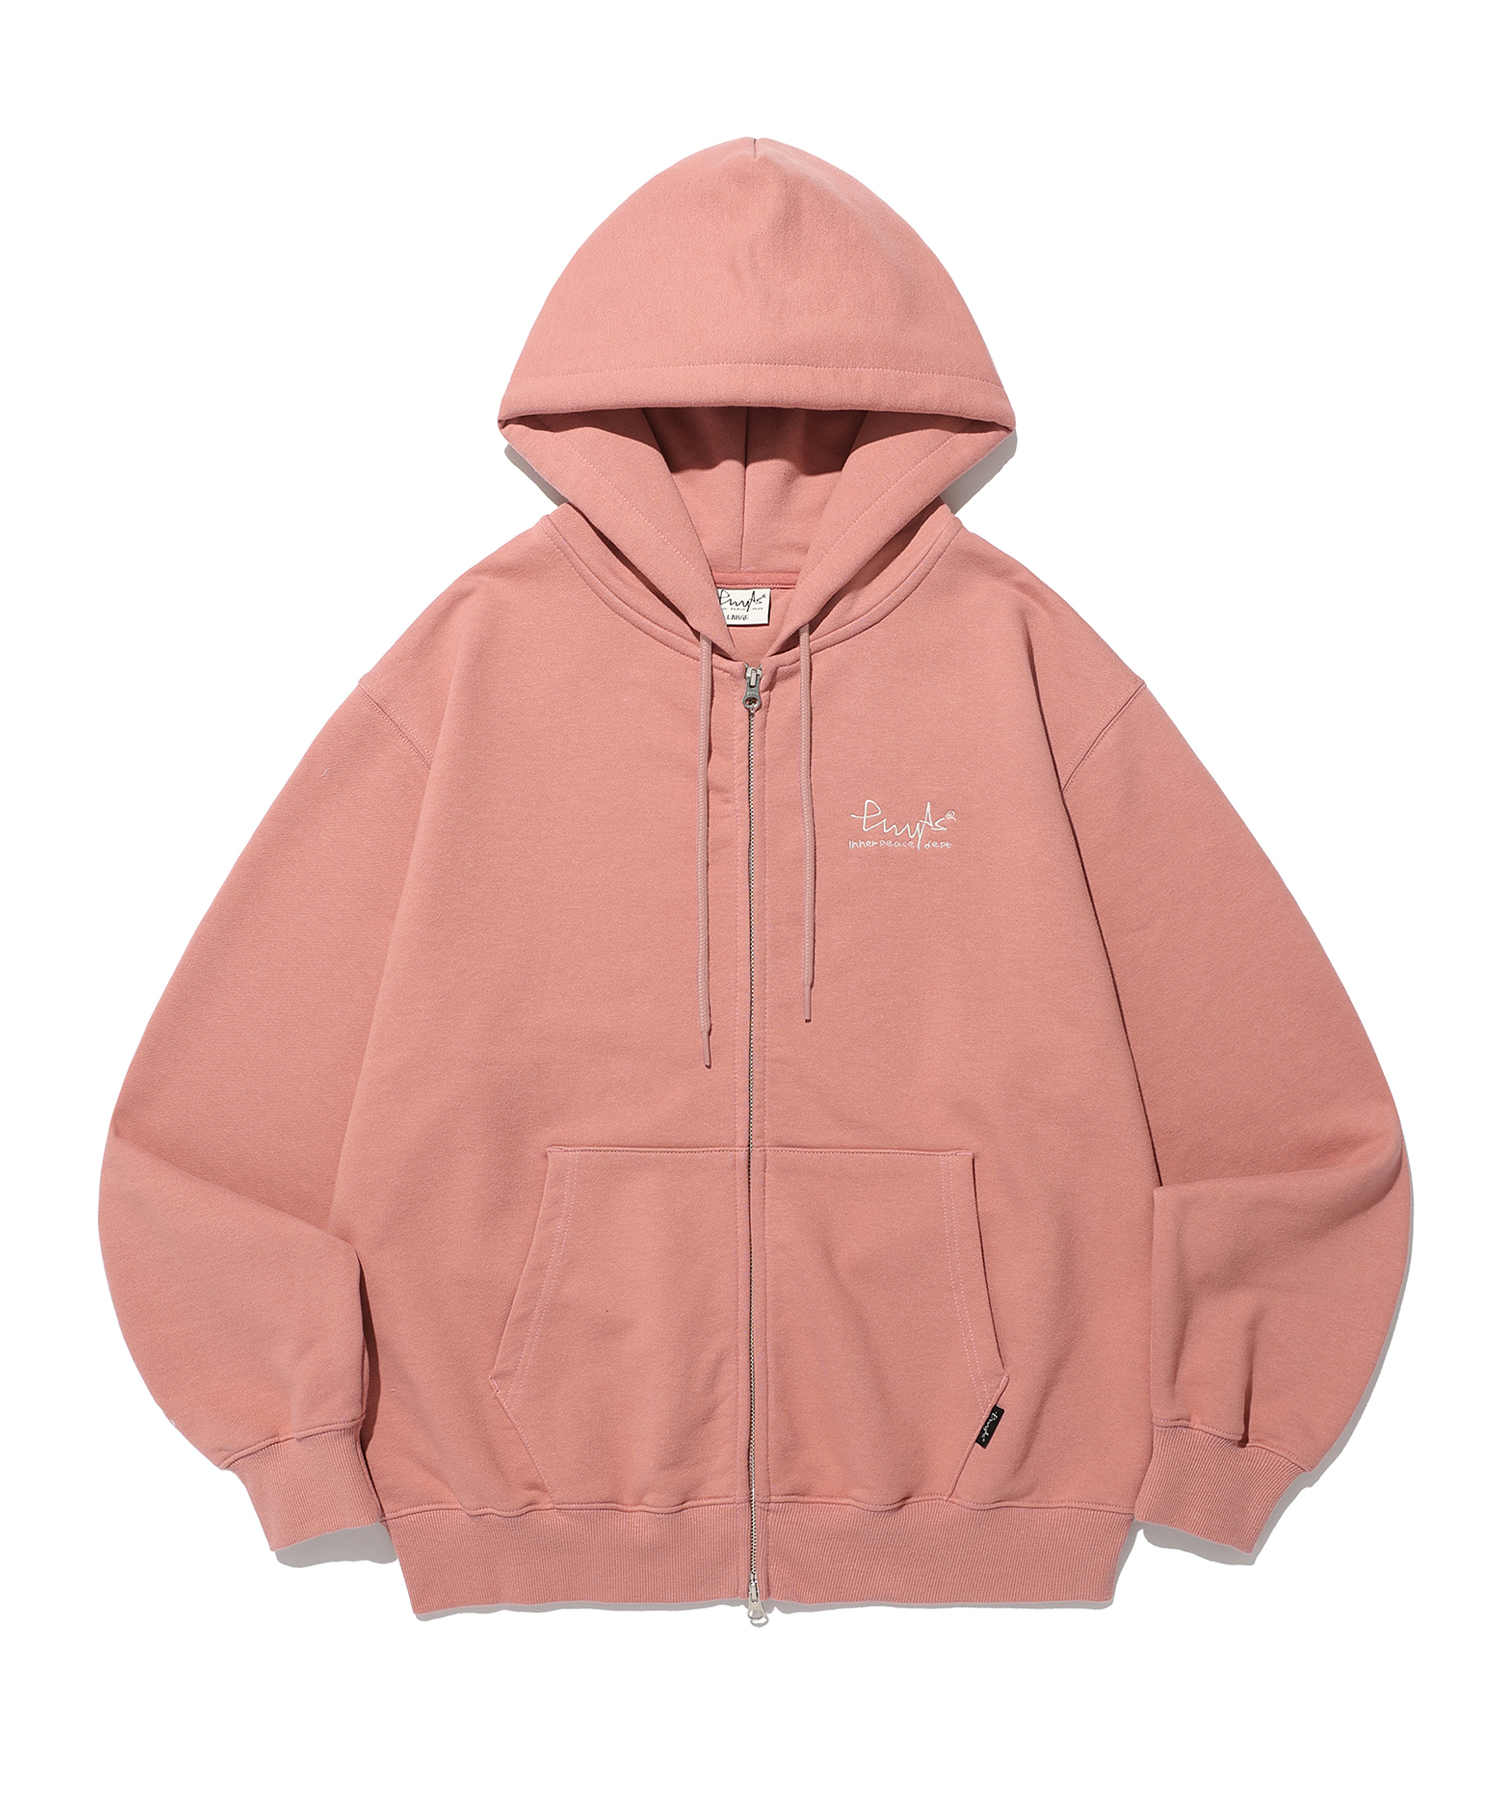 SMALL SIGN LOGO HOODIE ZIP UP DUSTY PINK